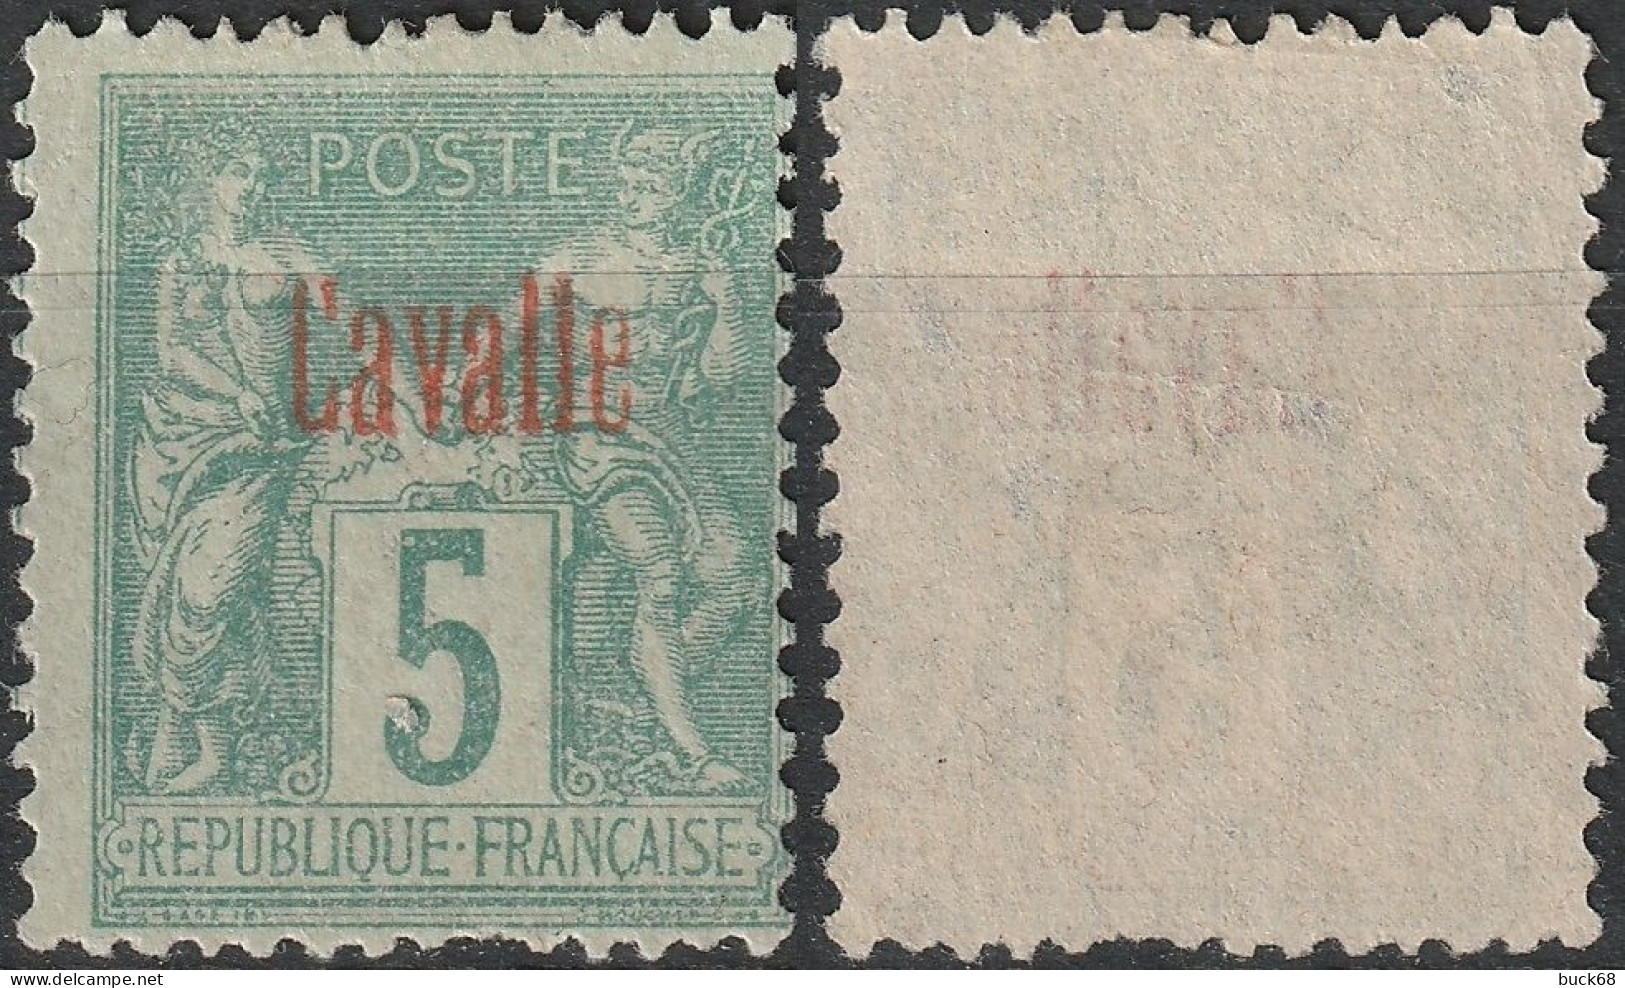 CAVALLE Poste 1a (*) MHNG Type Groupe Surcharge Rouge 1893 (CV 35 €) [ColCla] - Ungebraucht